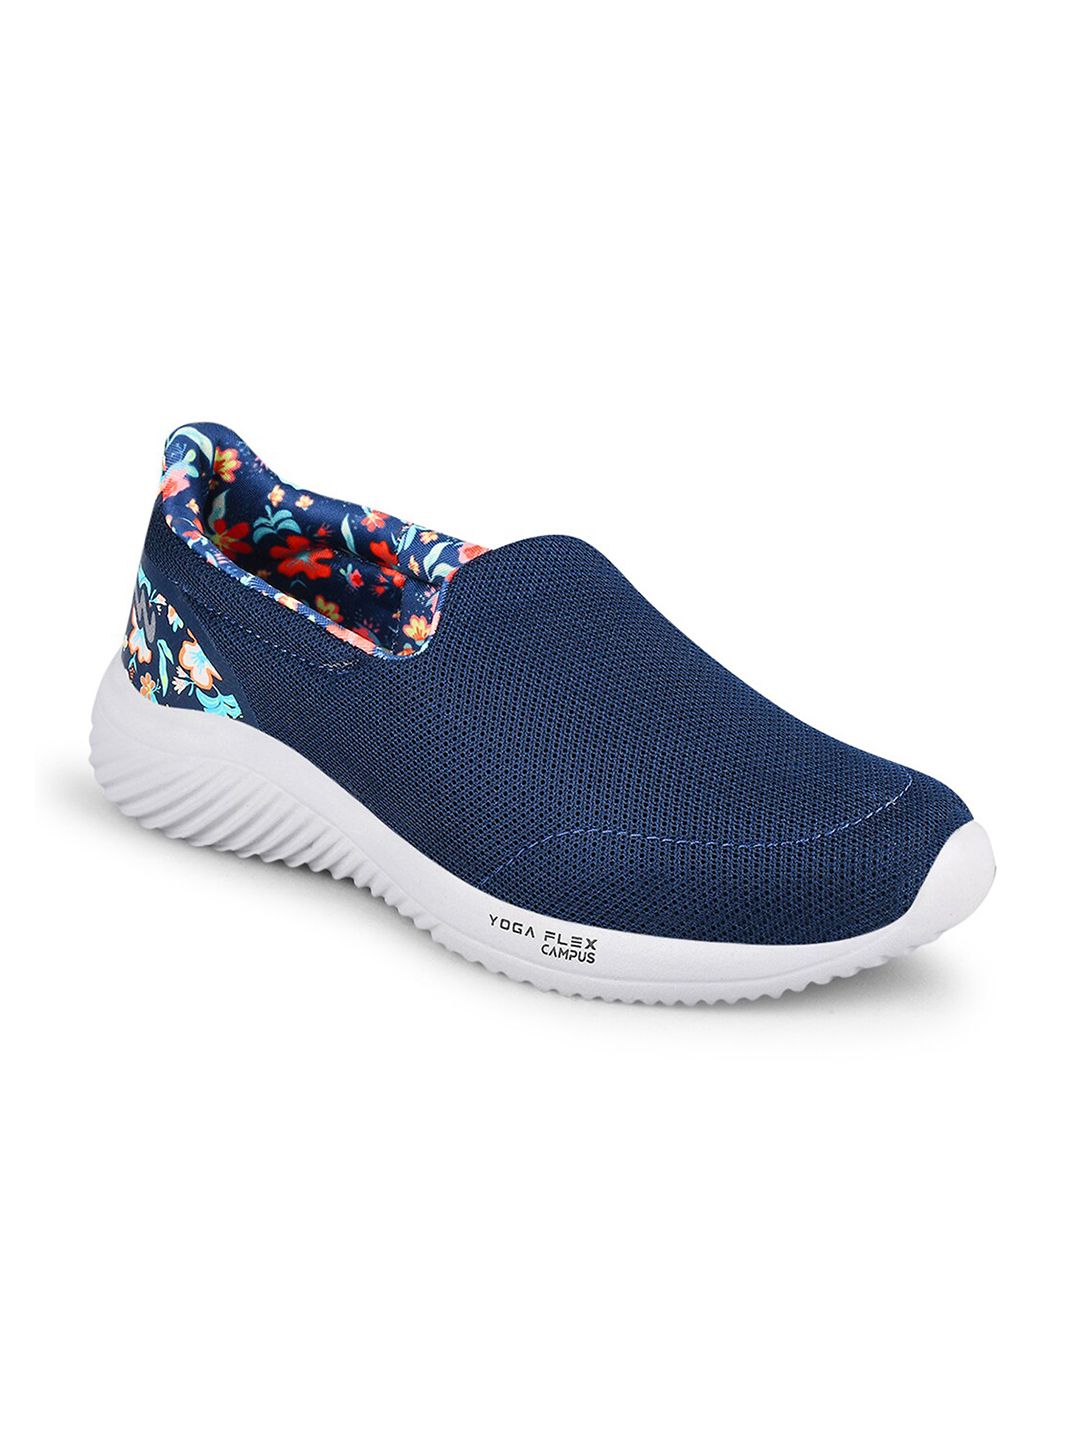 Campus Women Navy Blue Floral Printed Slip-On Mesh Running Shoes Price in India